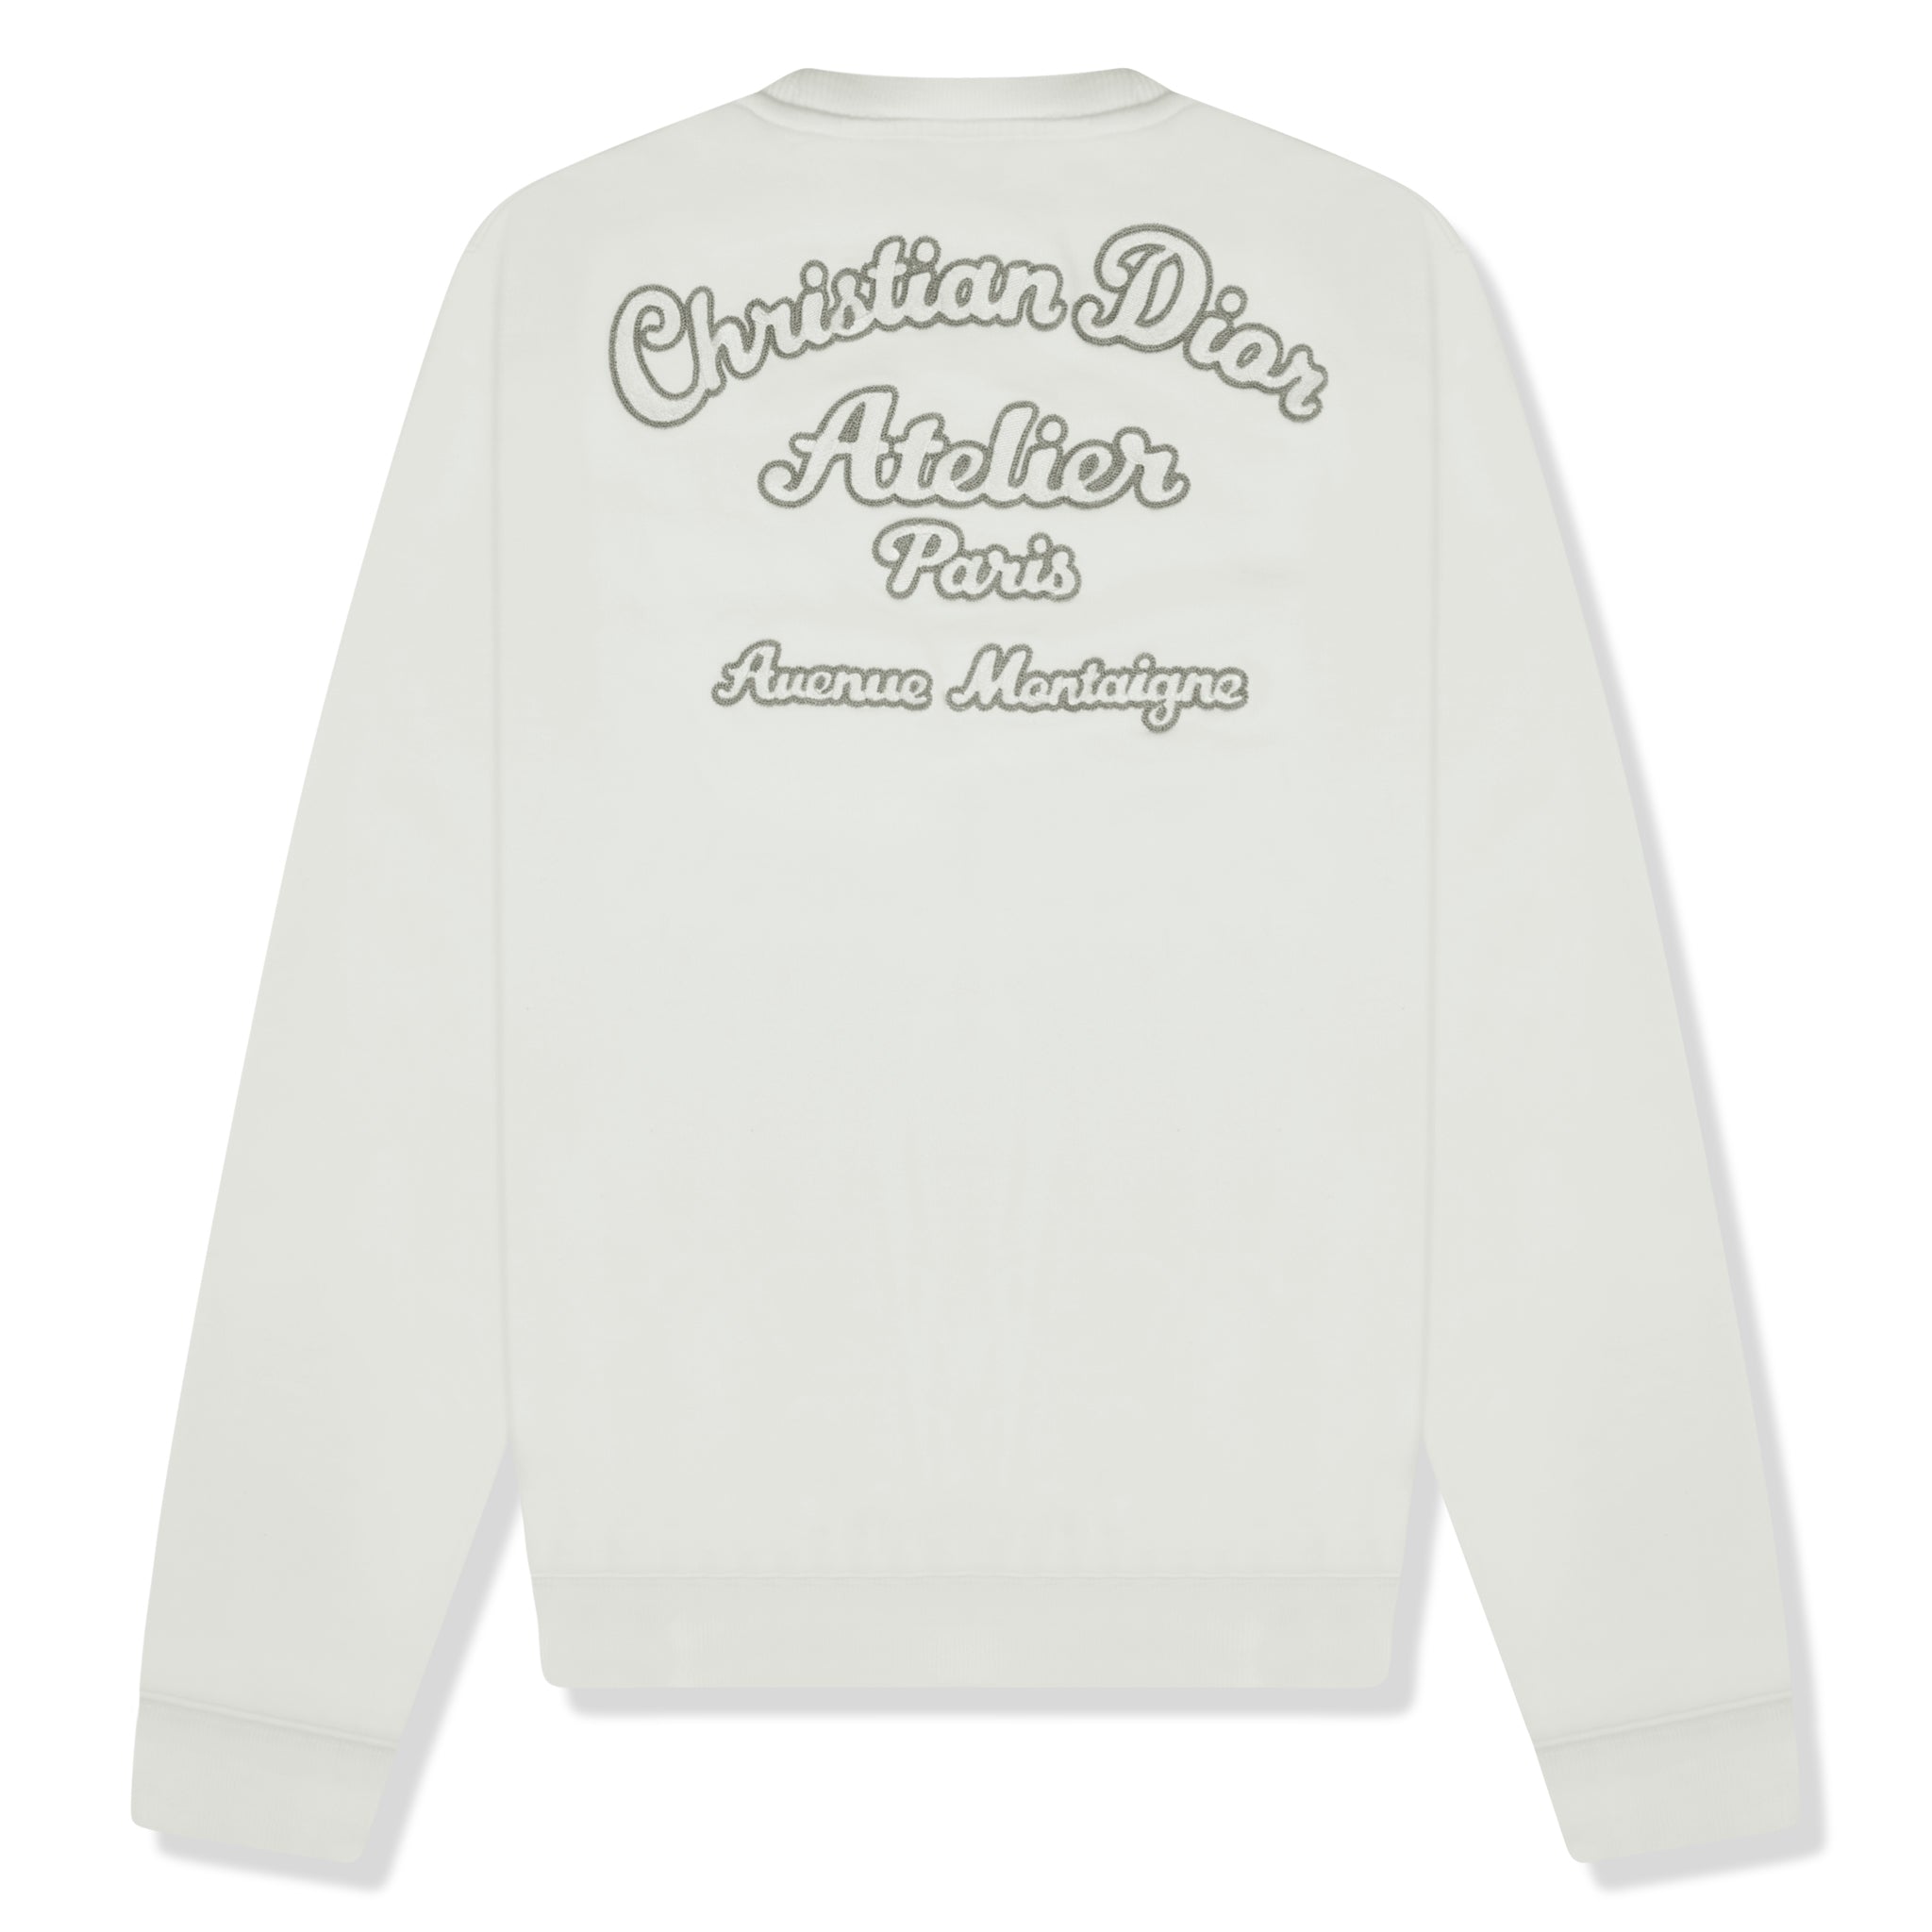 Back view of Dior 'Christian Dior Atelier' Sweatshirt White 293J699A0531